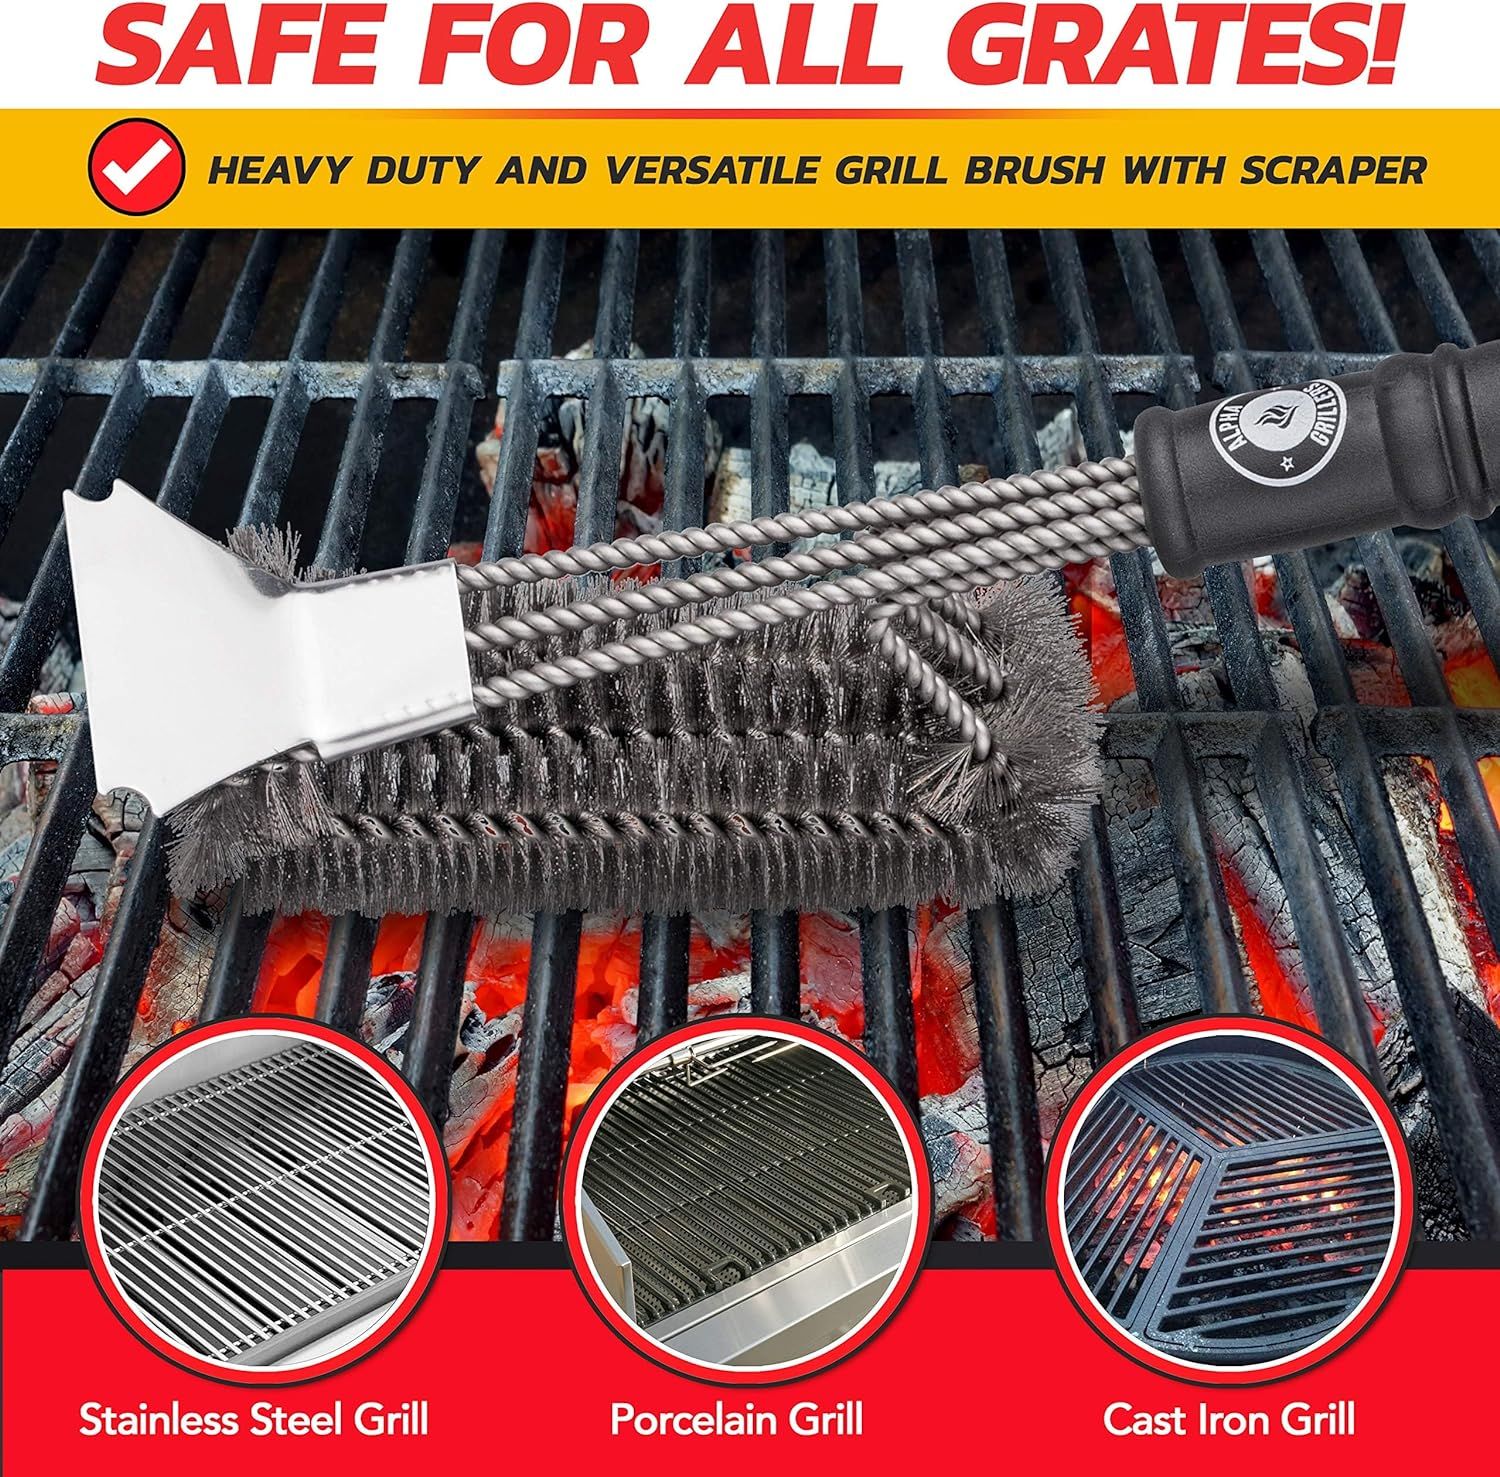 https://media.karousell.com/media/photos/products/2023/10/27/grill_brush_and_scraper__grill_1698400436_03268202_progressive